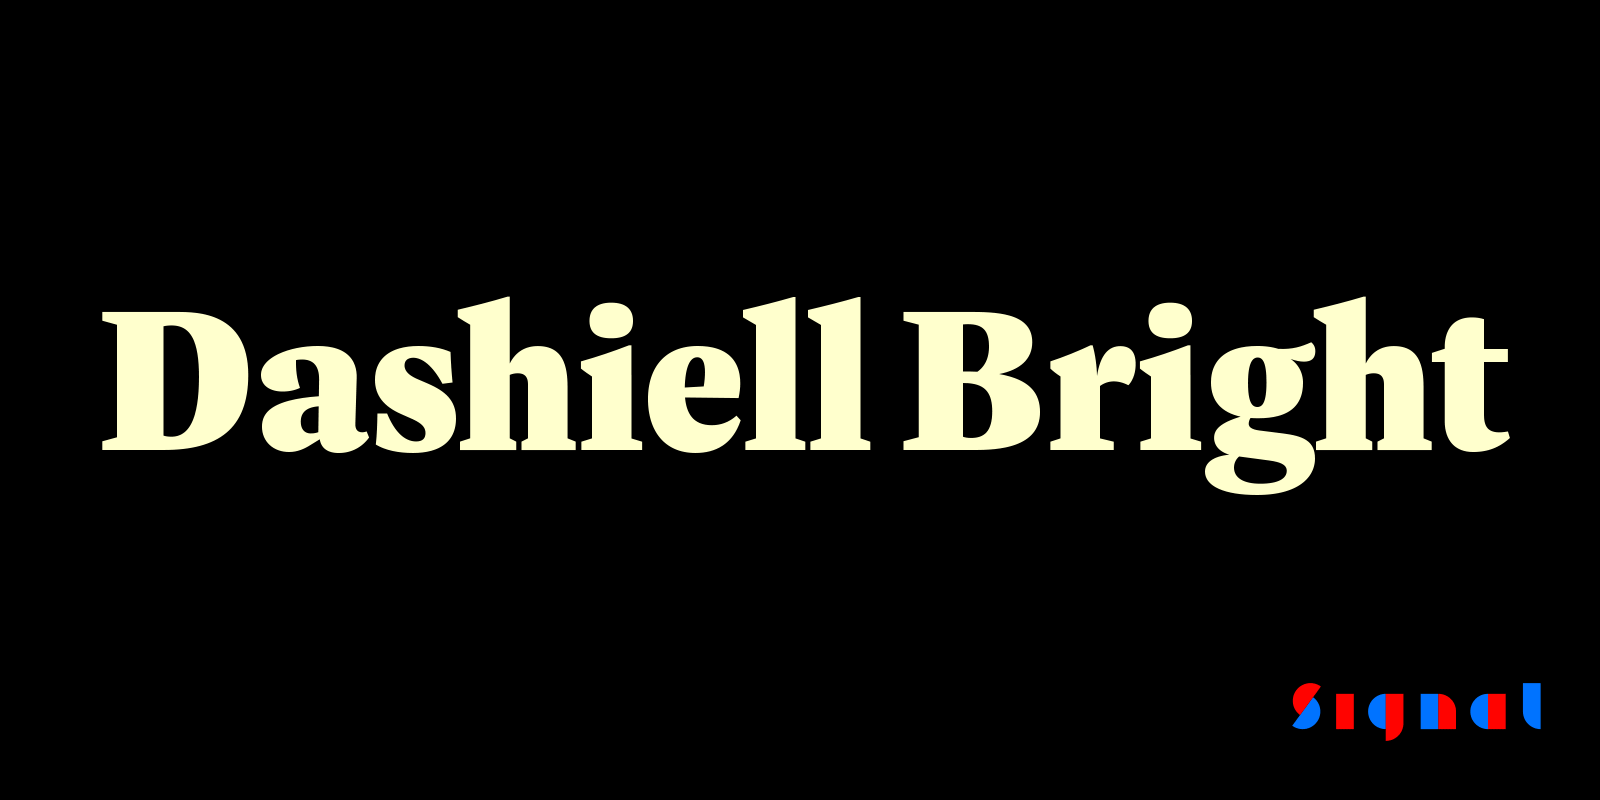 Card displaying Dashiell Bright typeface in various styles